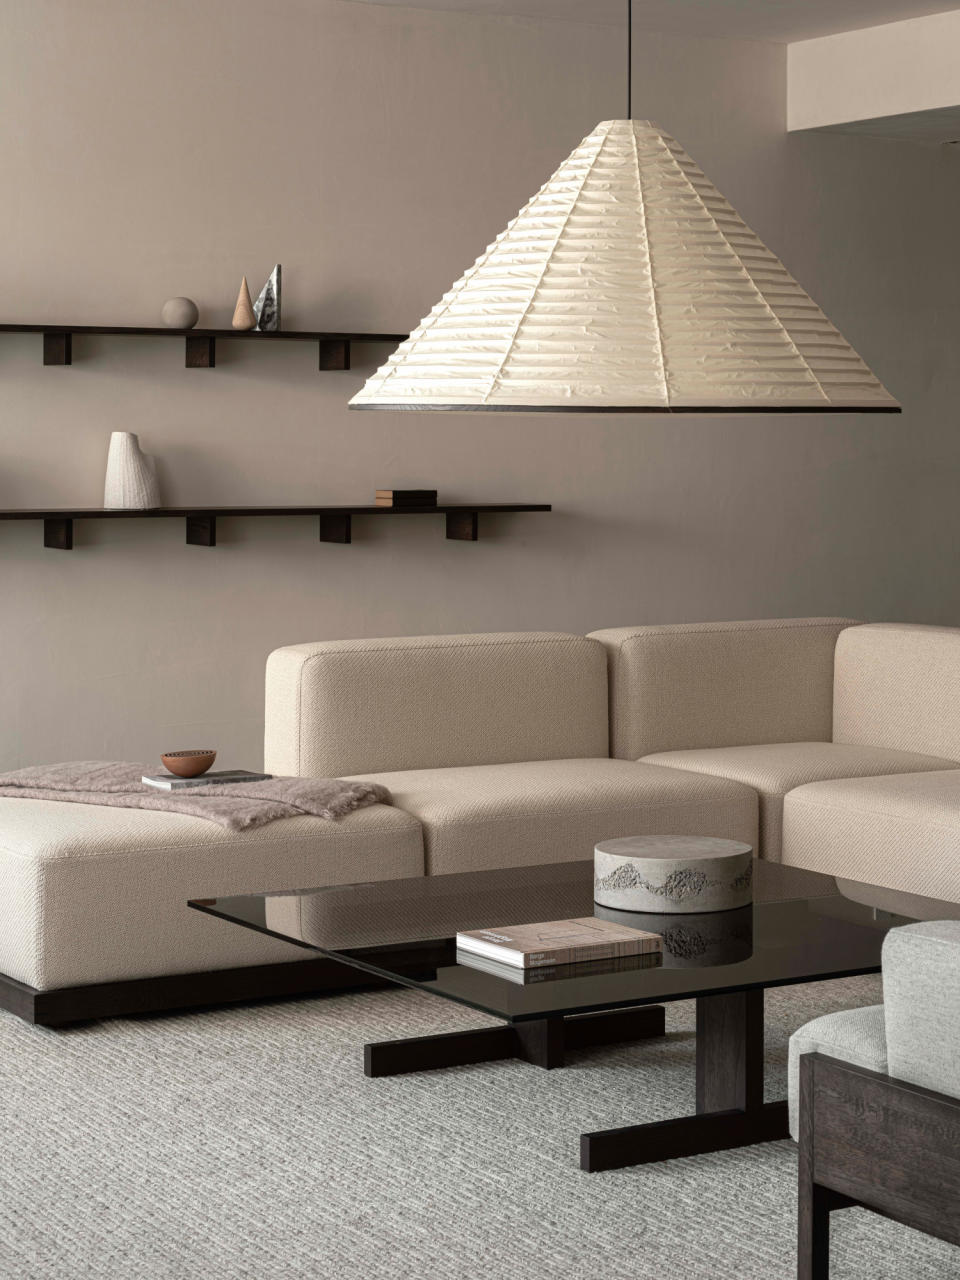 A warm beige living room with beige modular sofa, black gloss coffee table and oversized paper lantern